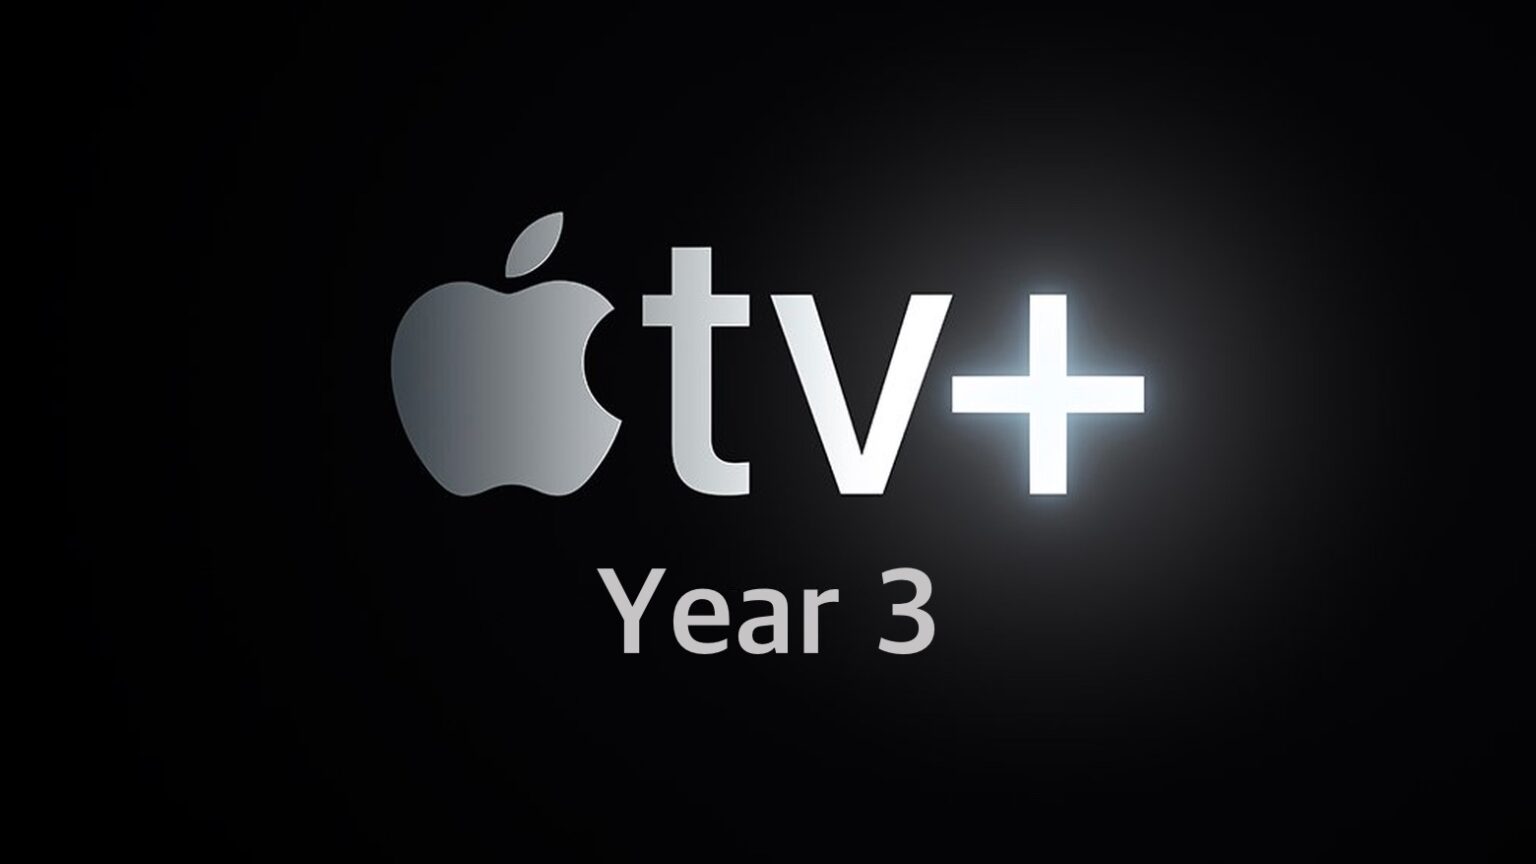 Upcoming Apple TV+ movies and shows we can't wait to watch